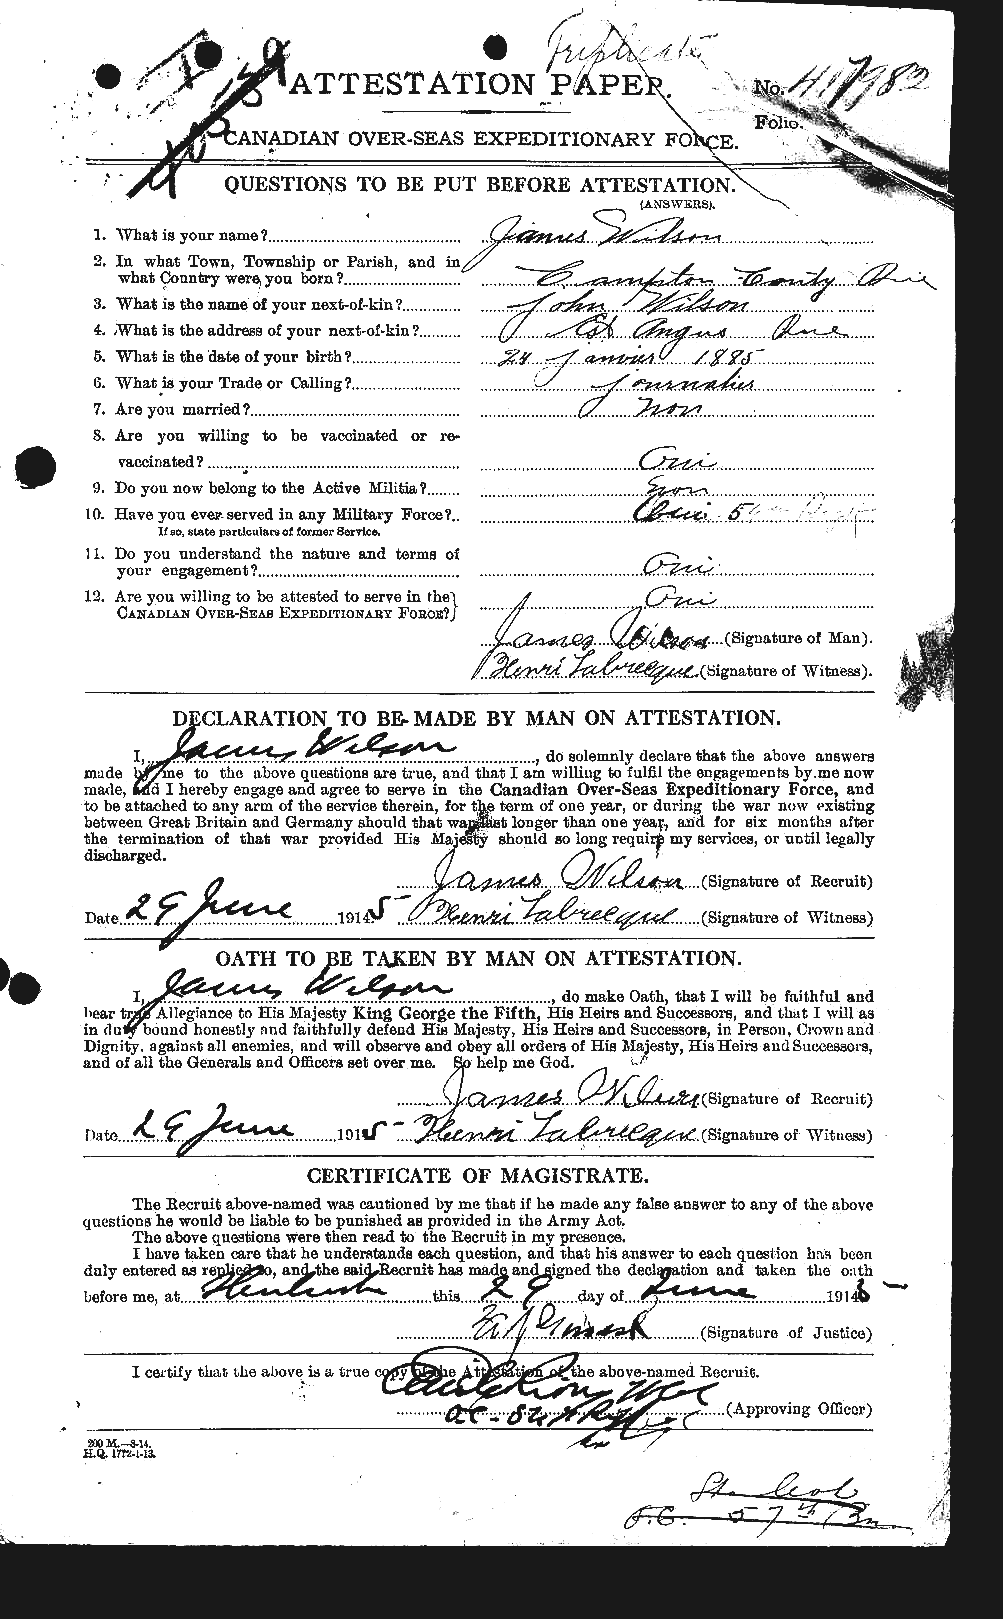 Personnel Records of the First World War - CEF 681357a